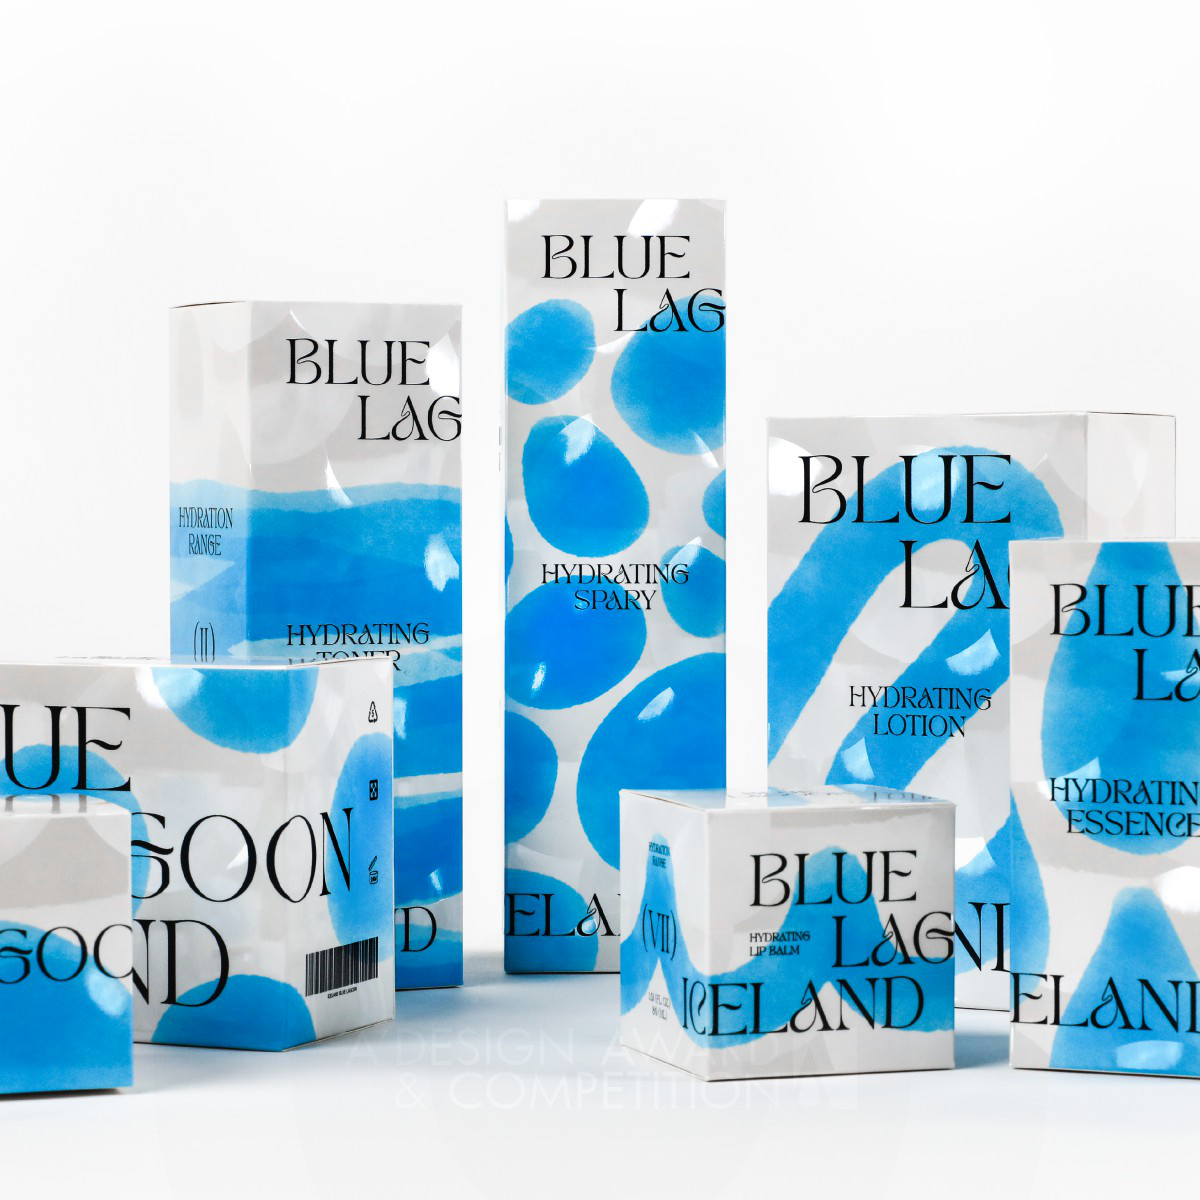 Blue Lagoon Iceland Packaging by Curtis Ju